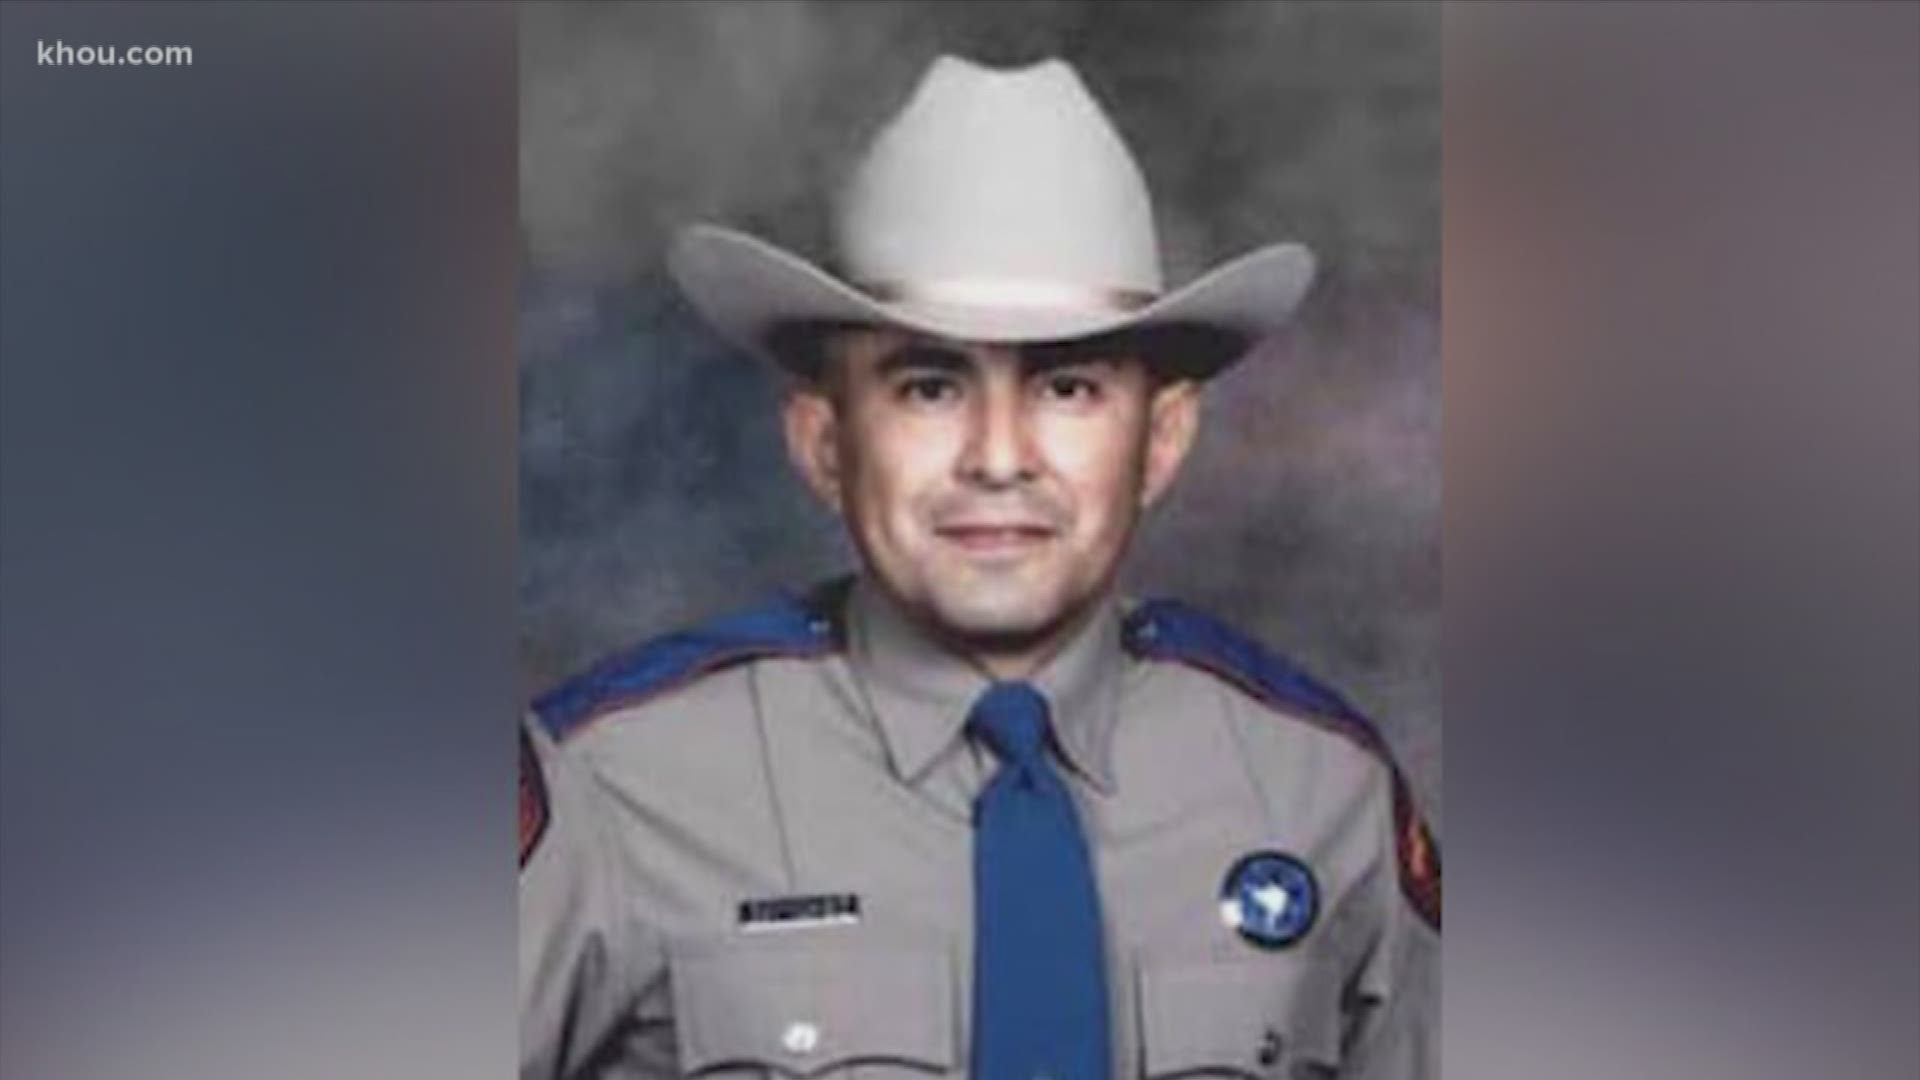 Sanchez was shot in Hidalgo County in April. On Saturday, we learned of his passing.